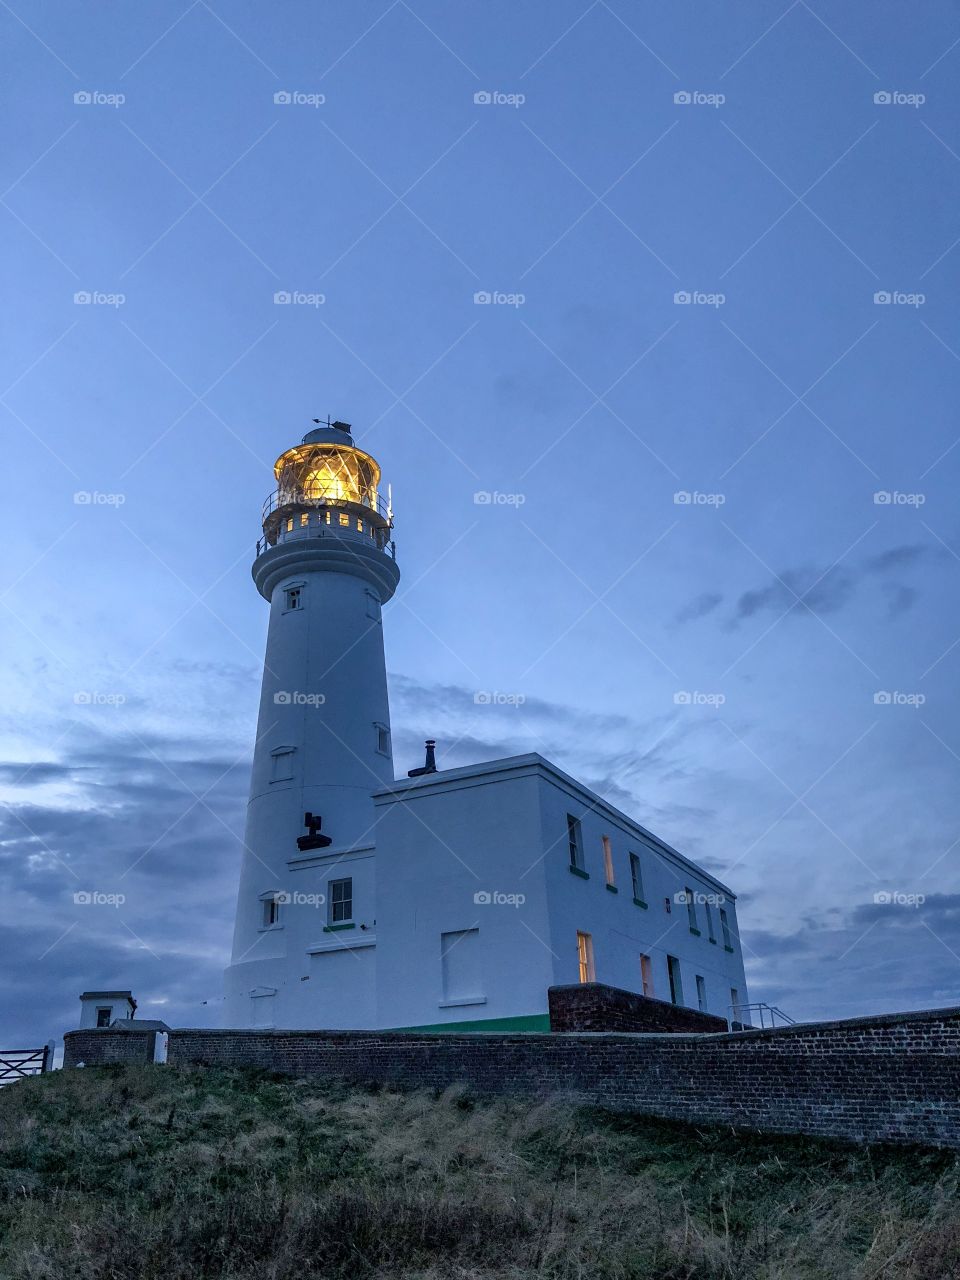 A blue hour shot of Flamborough head lighthouse with a low angle point of view. Flamborough, UK.